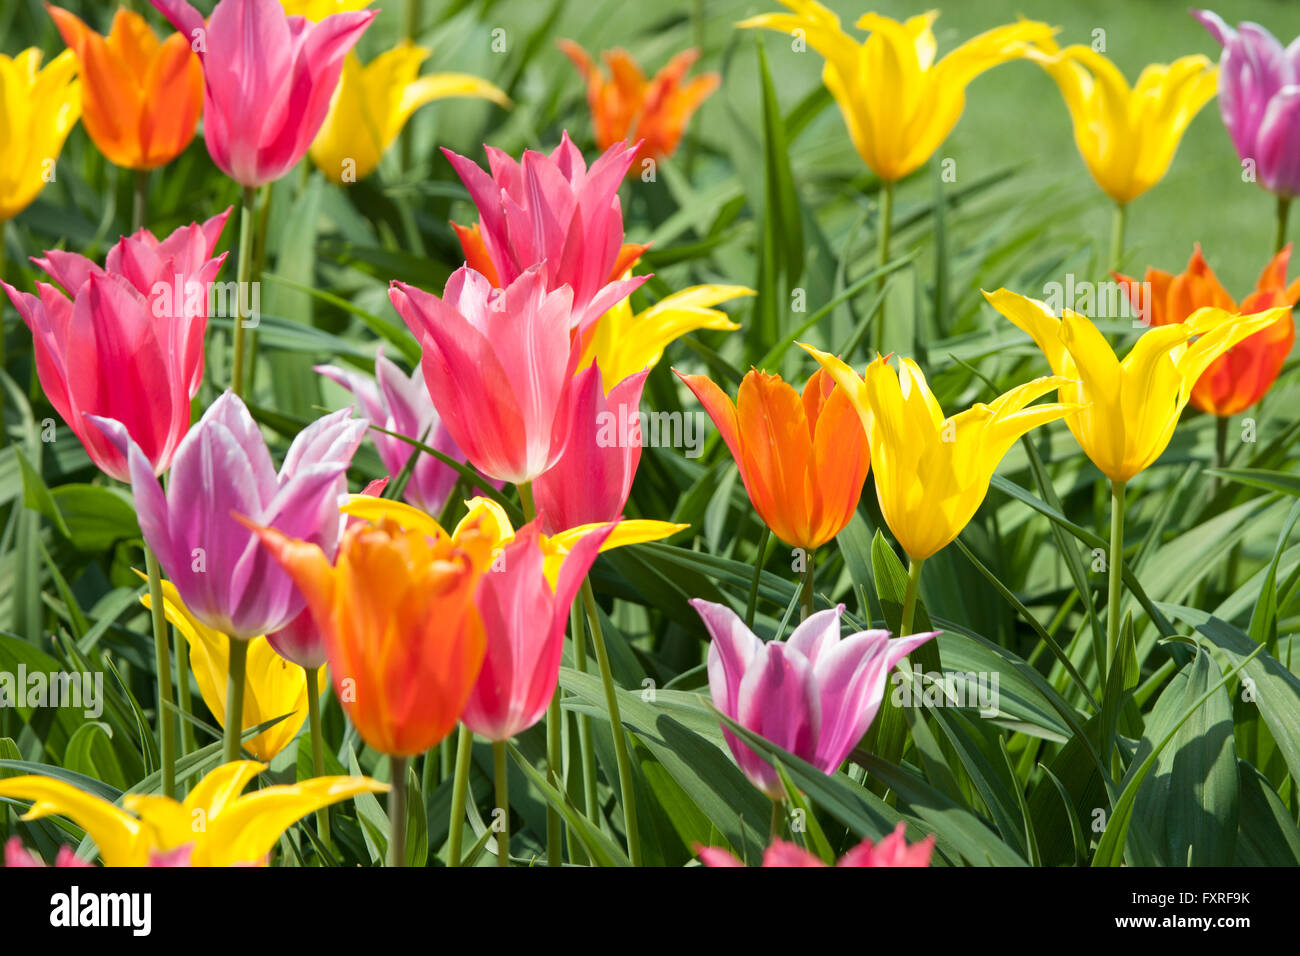 Colorful tulips yellow, red, purple and orange in a field. Liliaceae, Tulipa Stock Photo